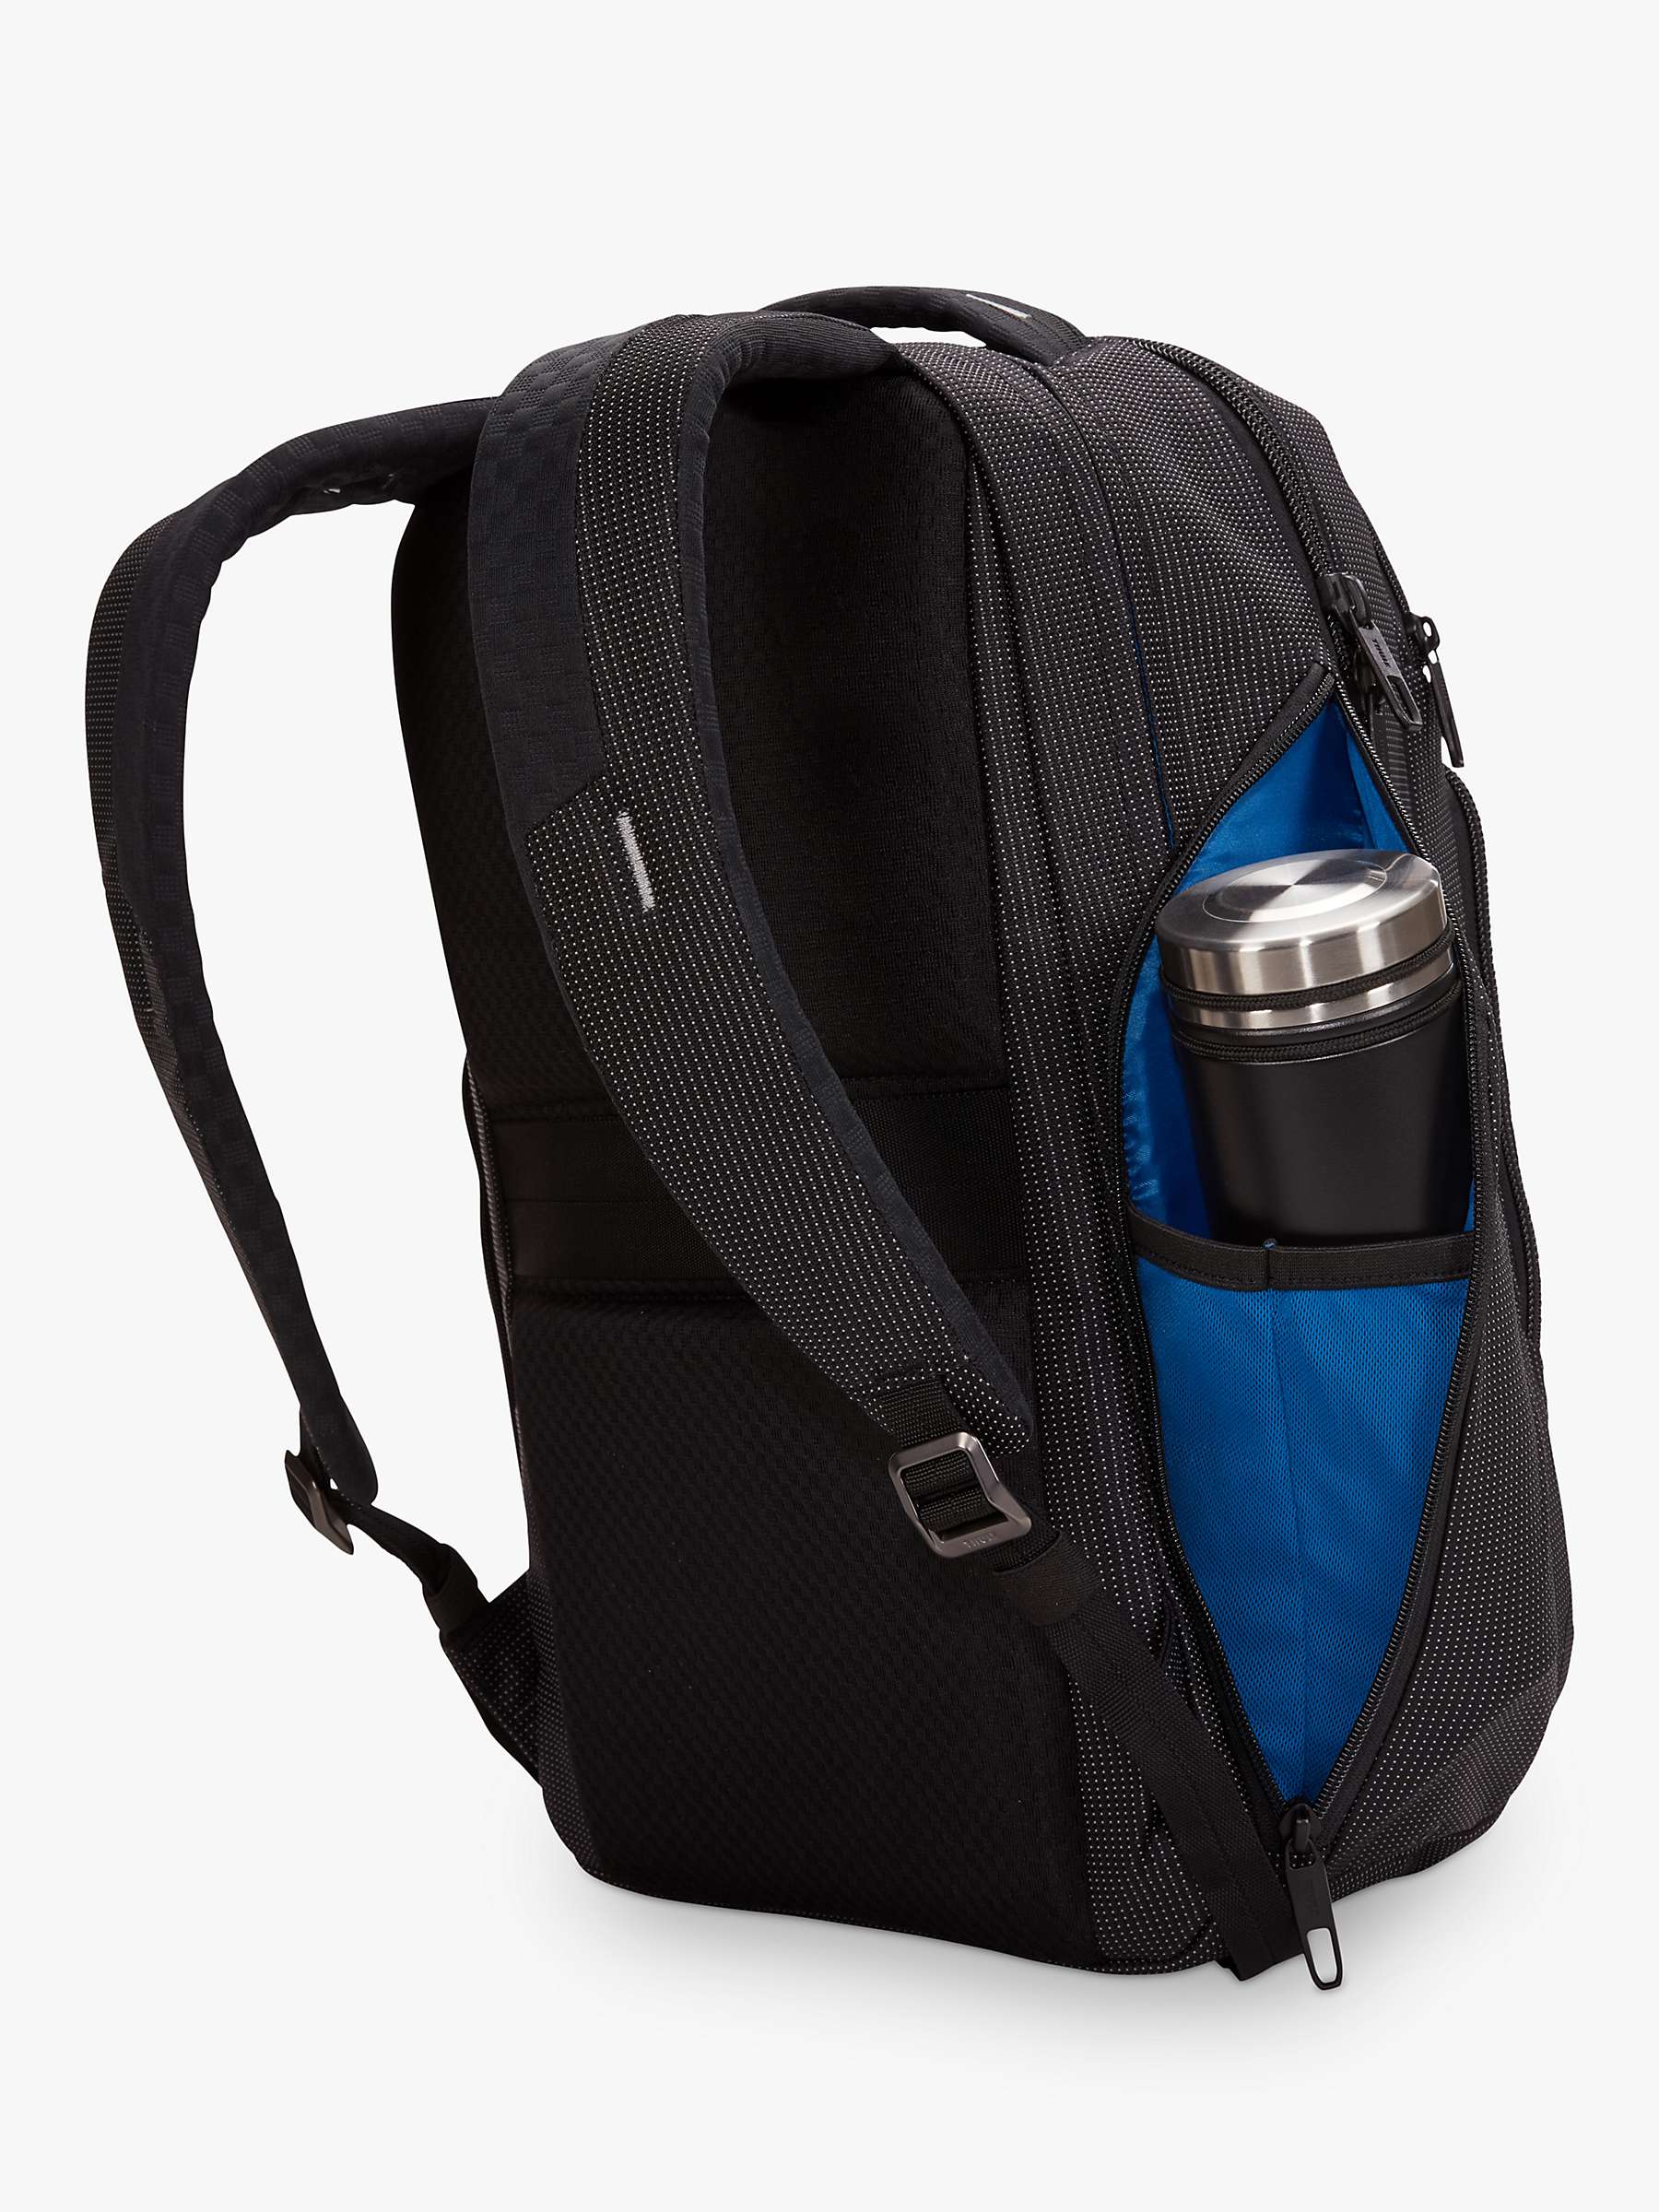 Buy Thule Crossover 2 30L Backpack Online at johnlewis.com